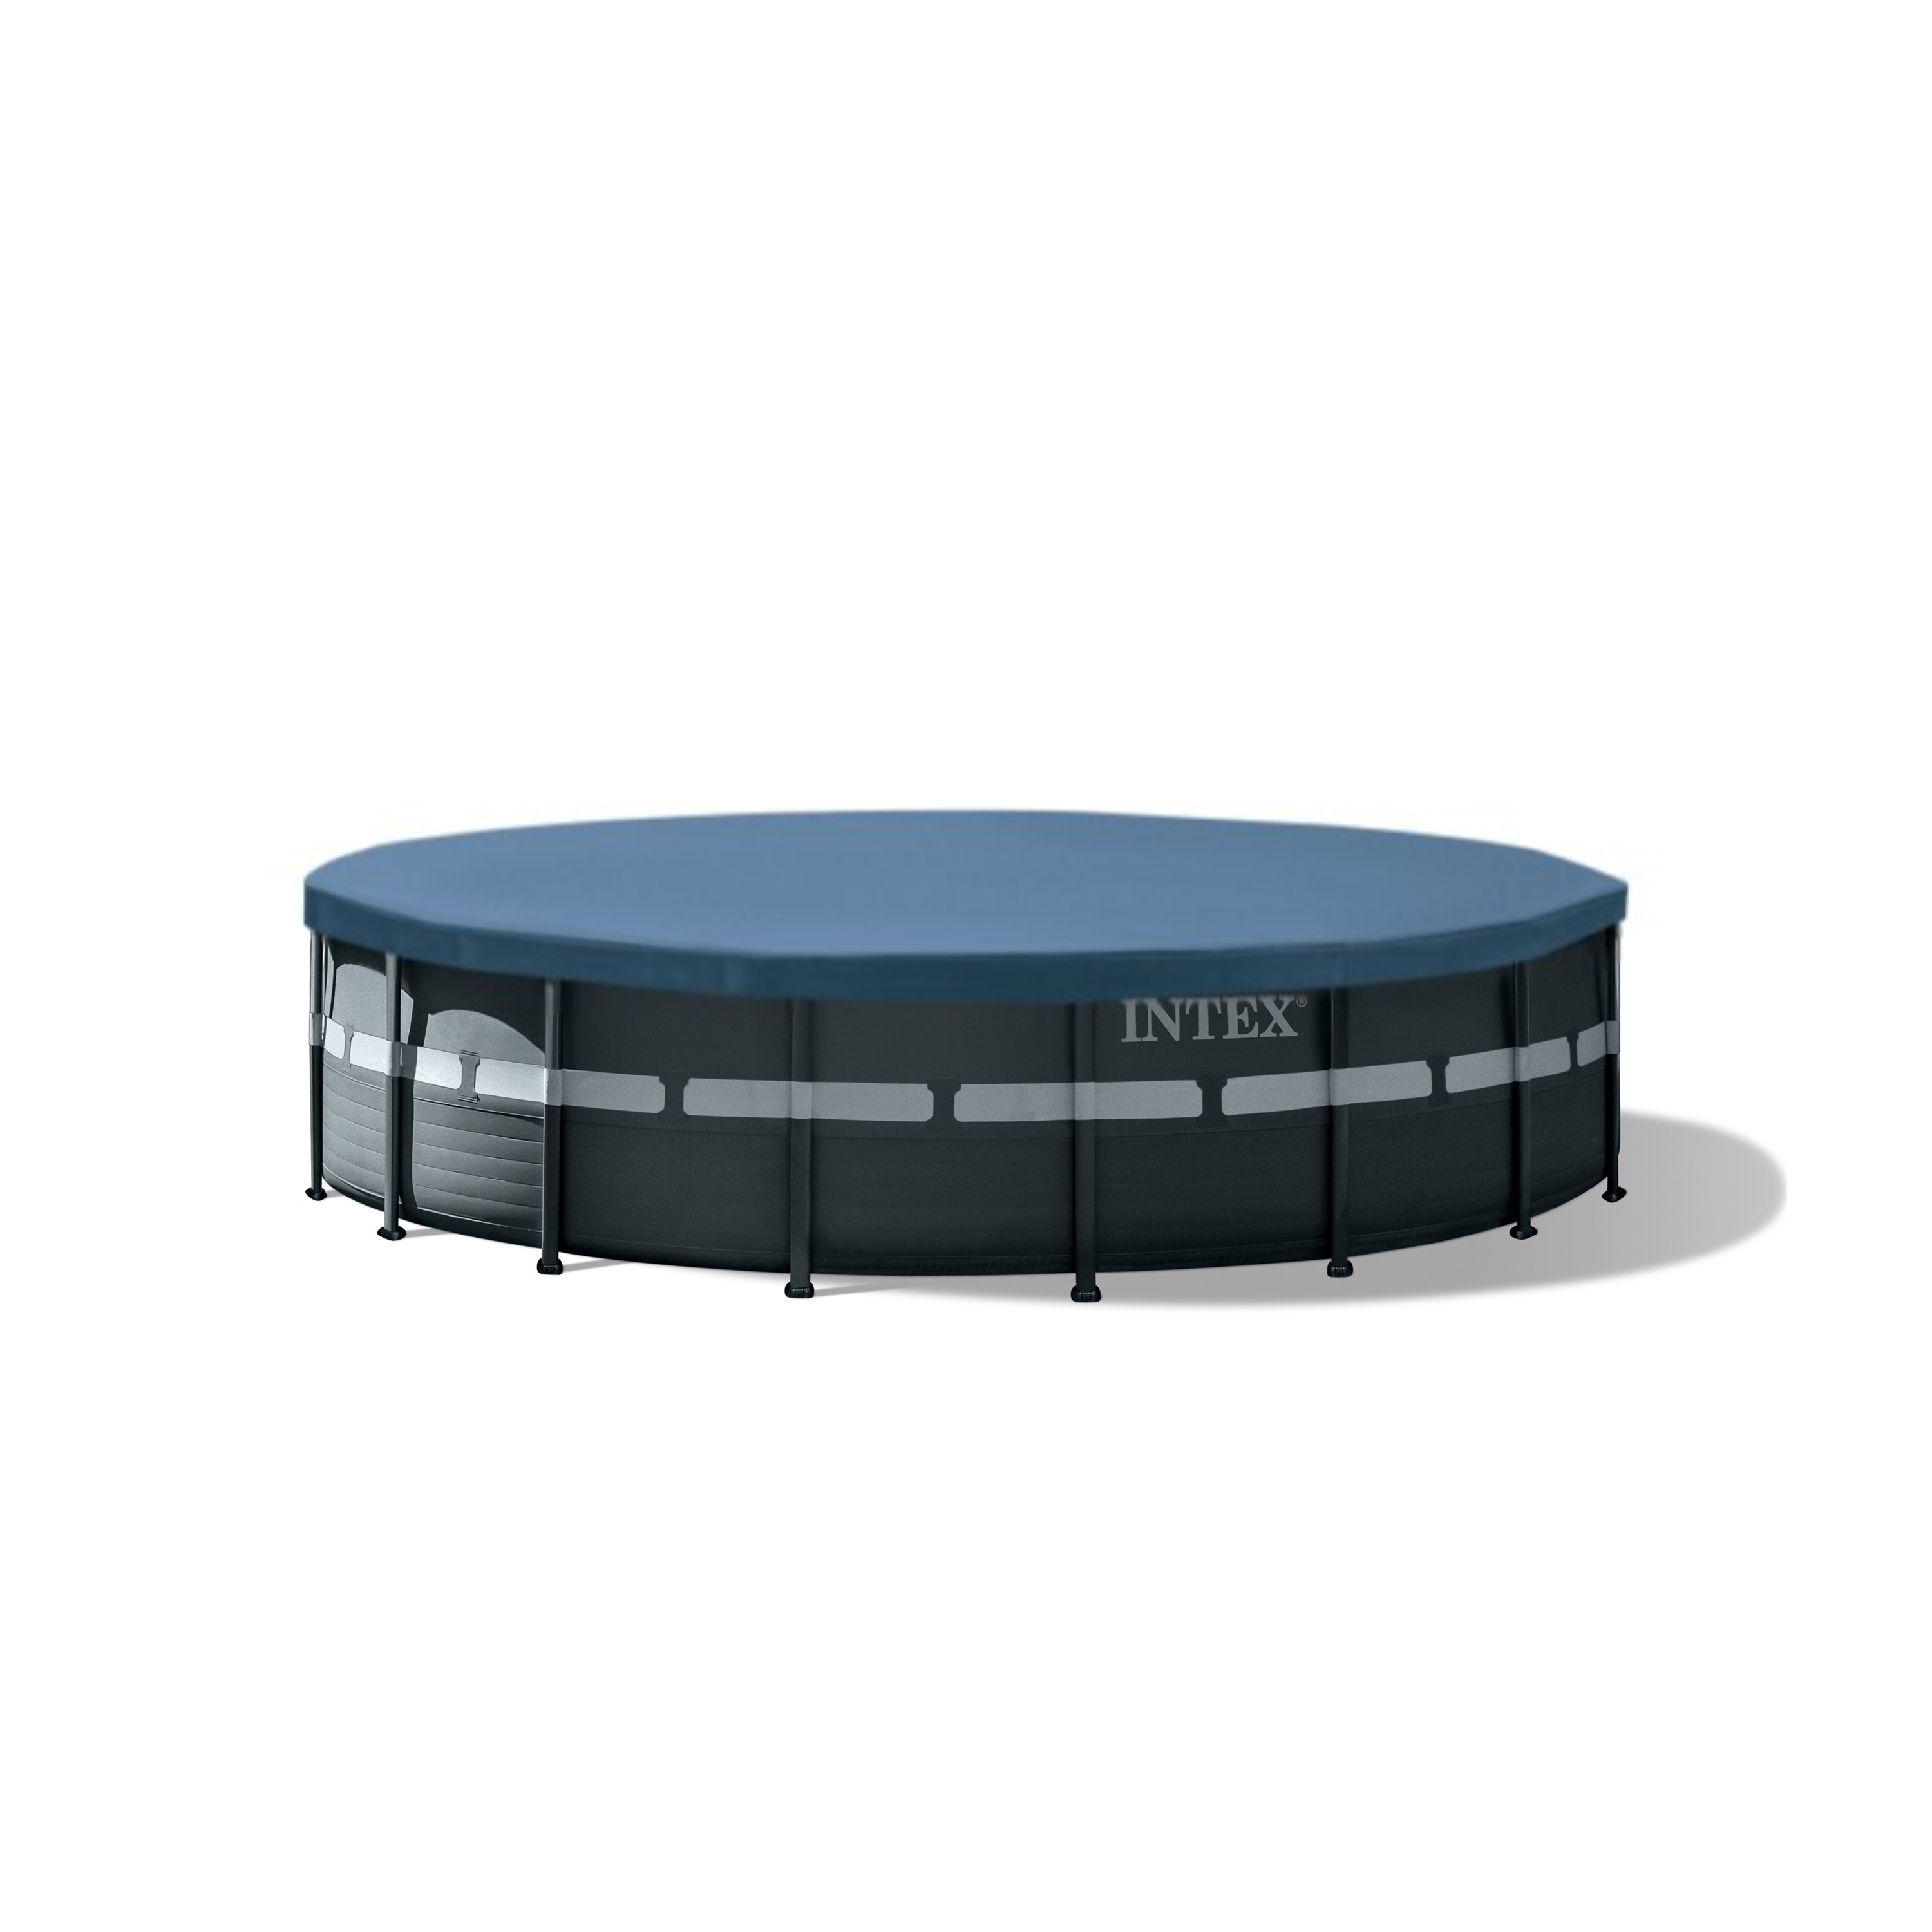 Intex 18Ft x 52In Ultra XTR Frame Round Above Ground Swimming Pool Set with Pump - image 3 of 12